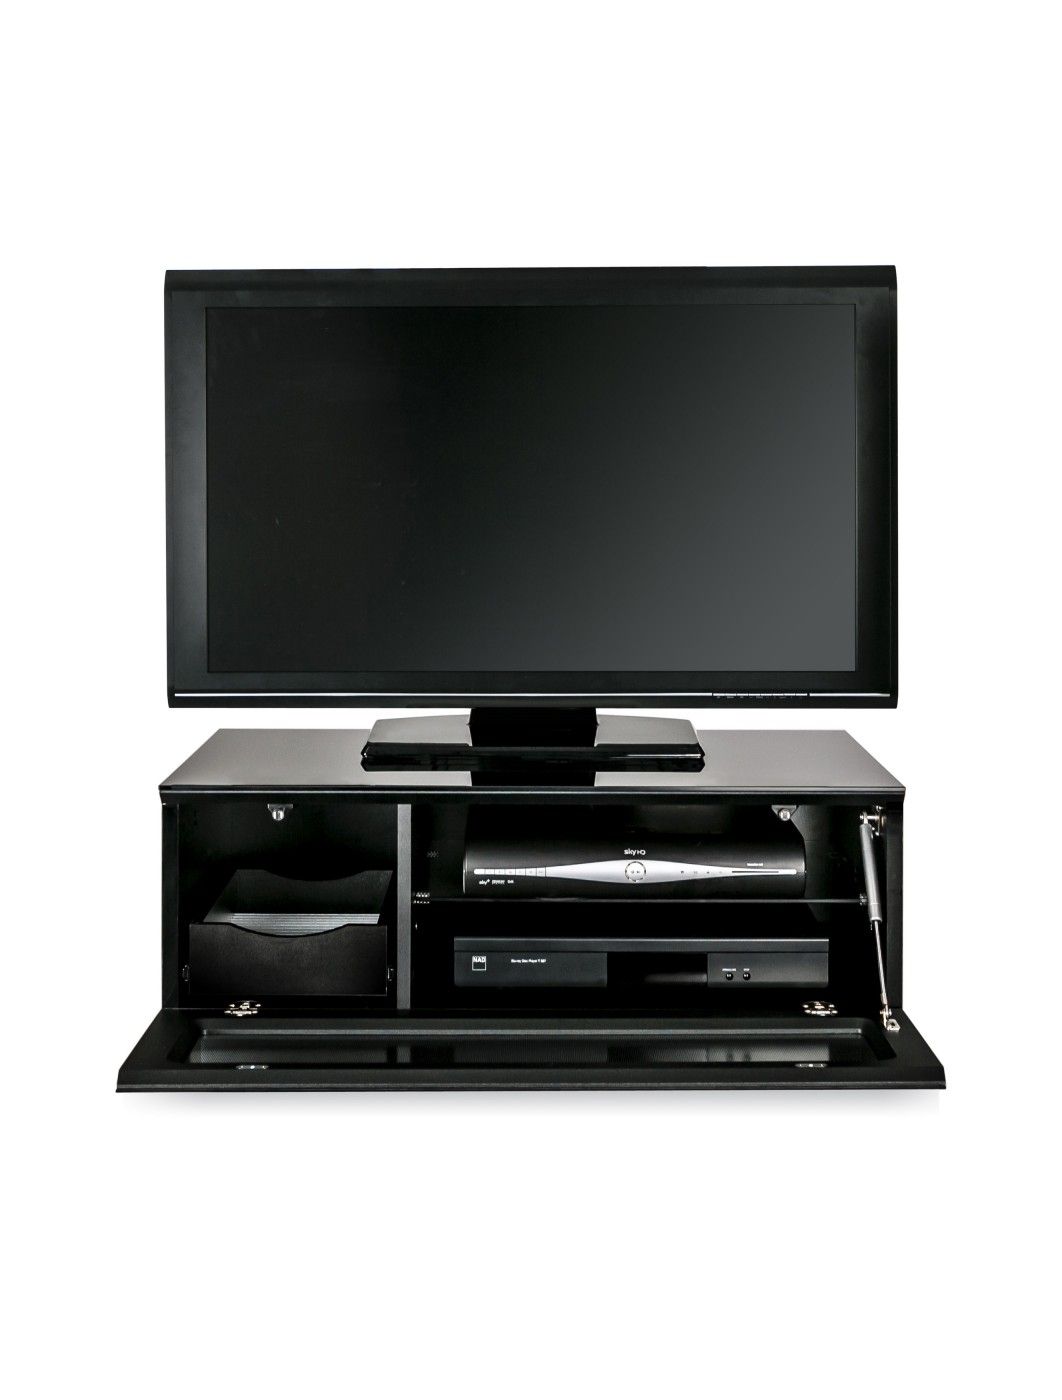 Tv Stand Element Modular Emtmod850 Blk Tv Cabinet Intended For 57&#039;&#039; Tv Stands With Open Glass Shelves Gray &amp; Black Finsh (Gallery 1 of 15)